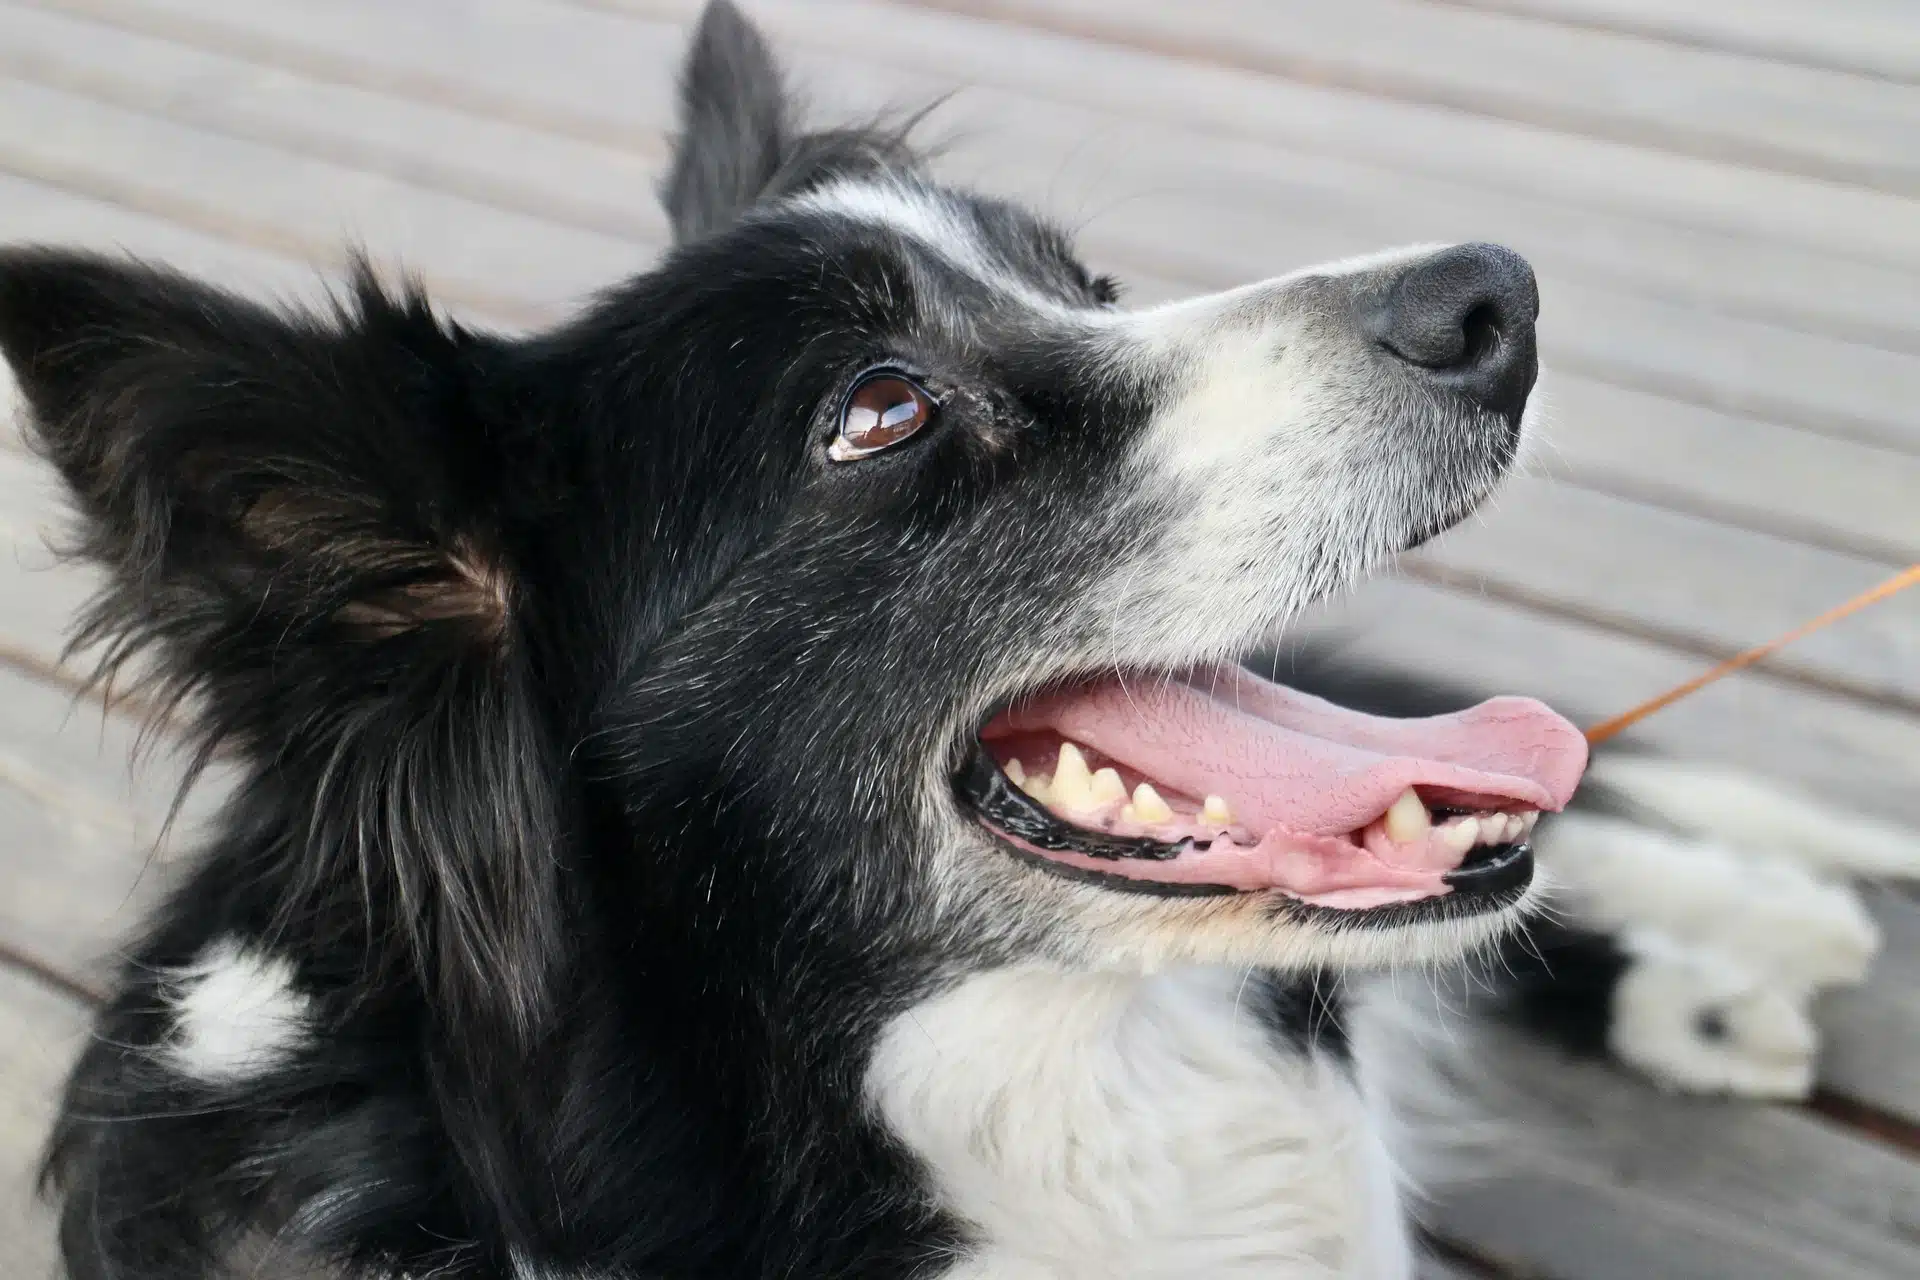 How To Care For Border Collies